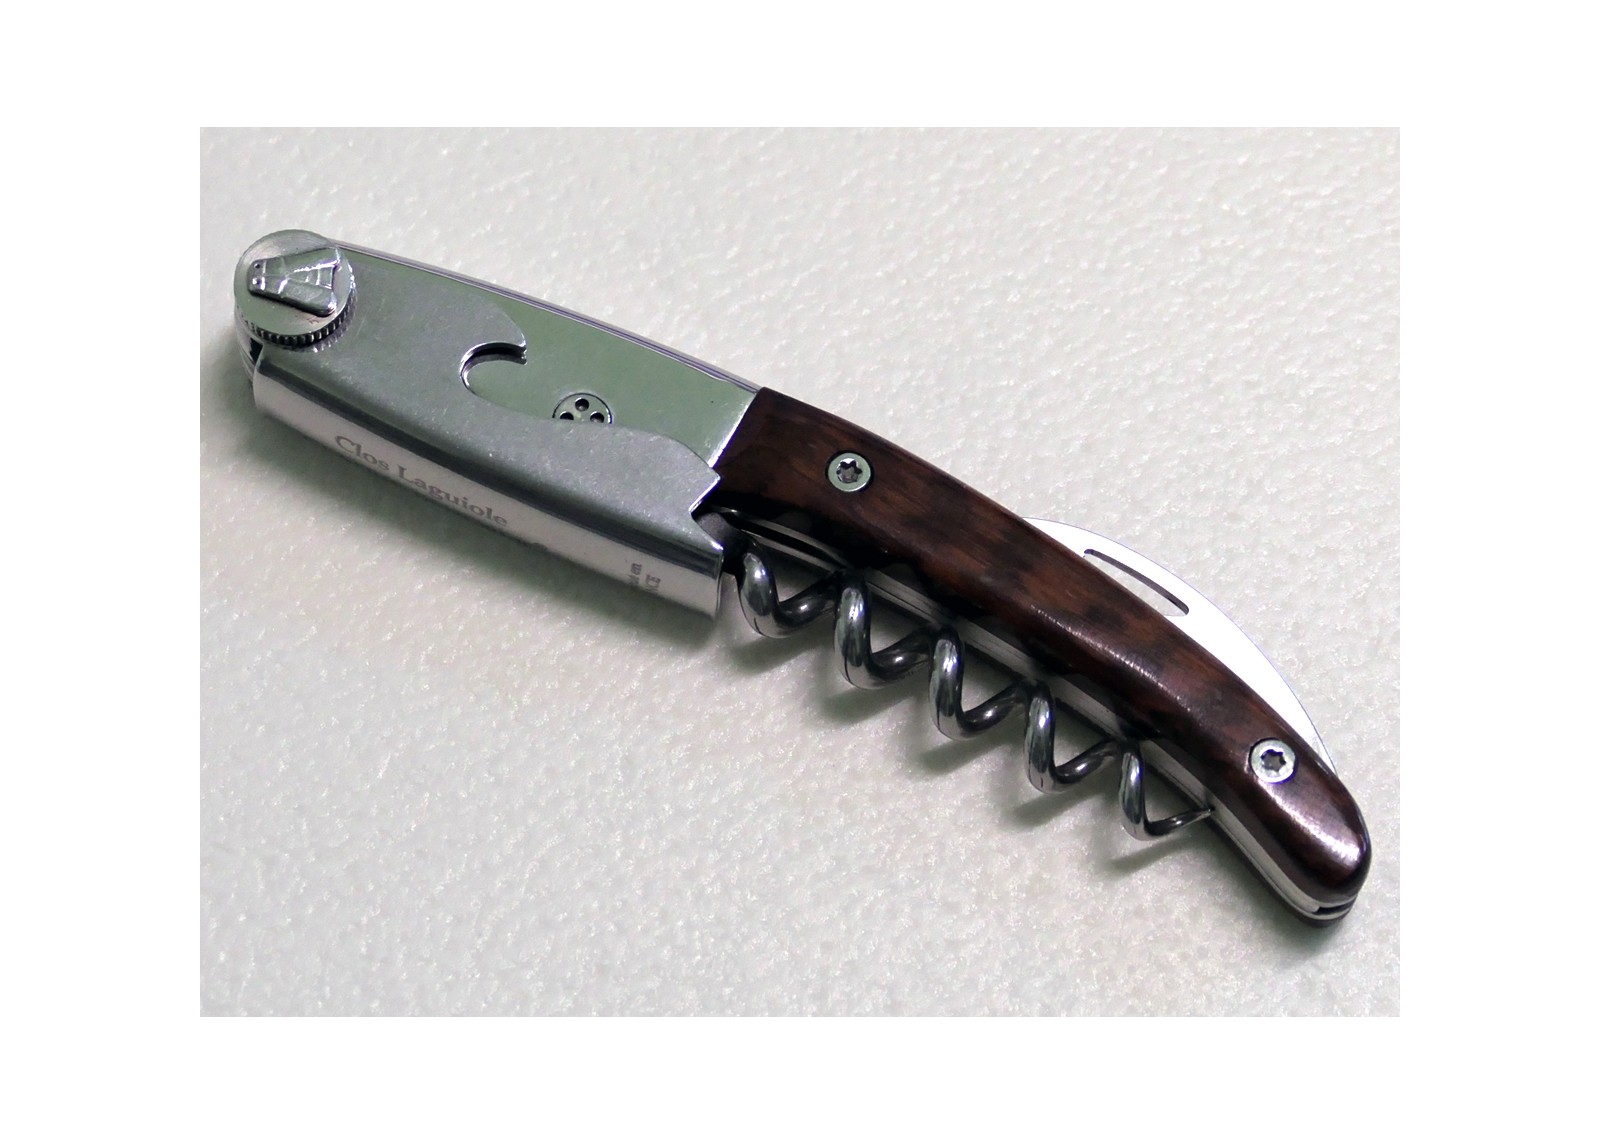 https://laguiole-17592.kxcdn.com/20123-large_default/laguiole-corkscrew-with-amourette-wood-snakewood-handle-and-stainless-steel-bolster.jpg